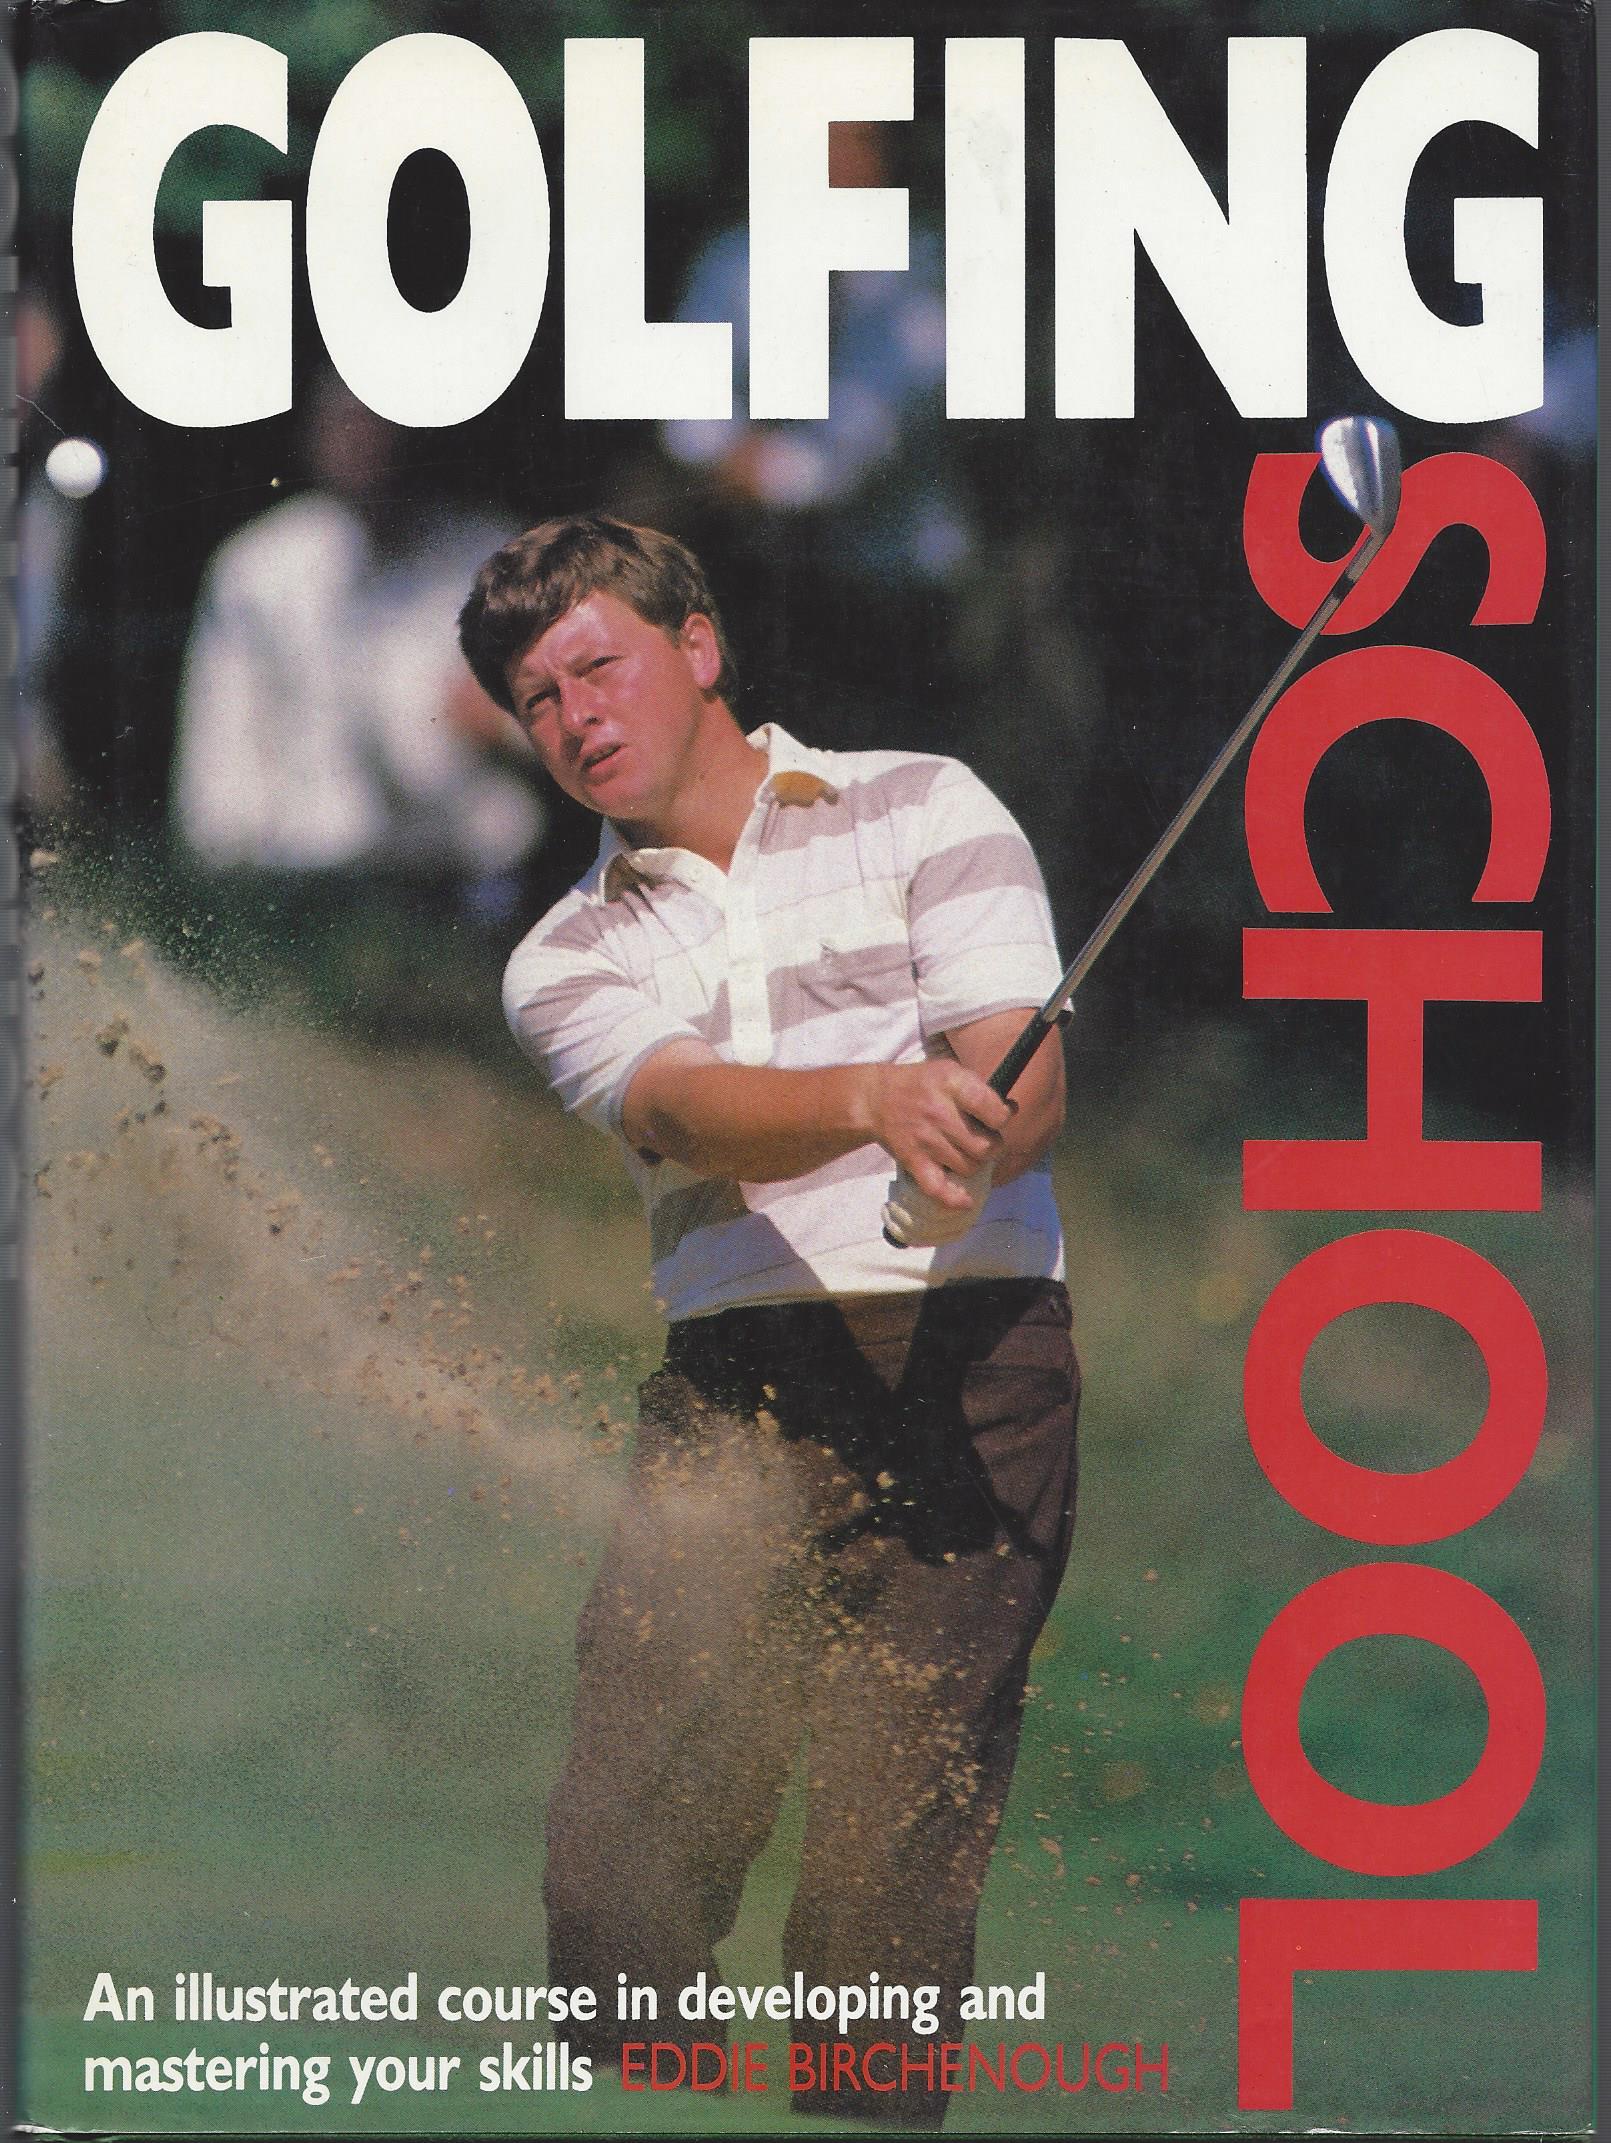 Birchenough, Eddie - Golfing School -An Illustrated course in developing and mastering your skills